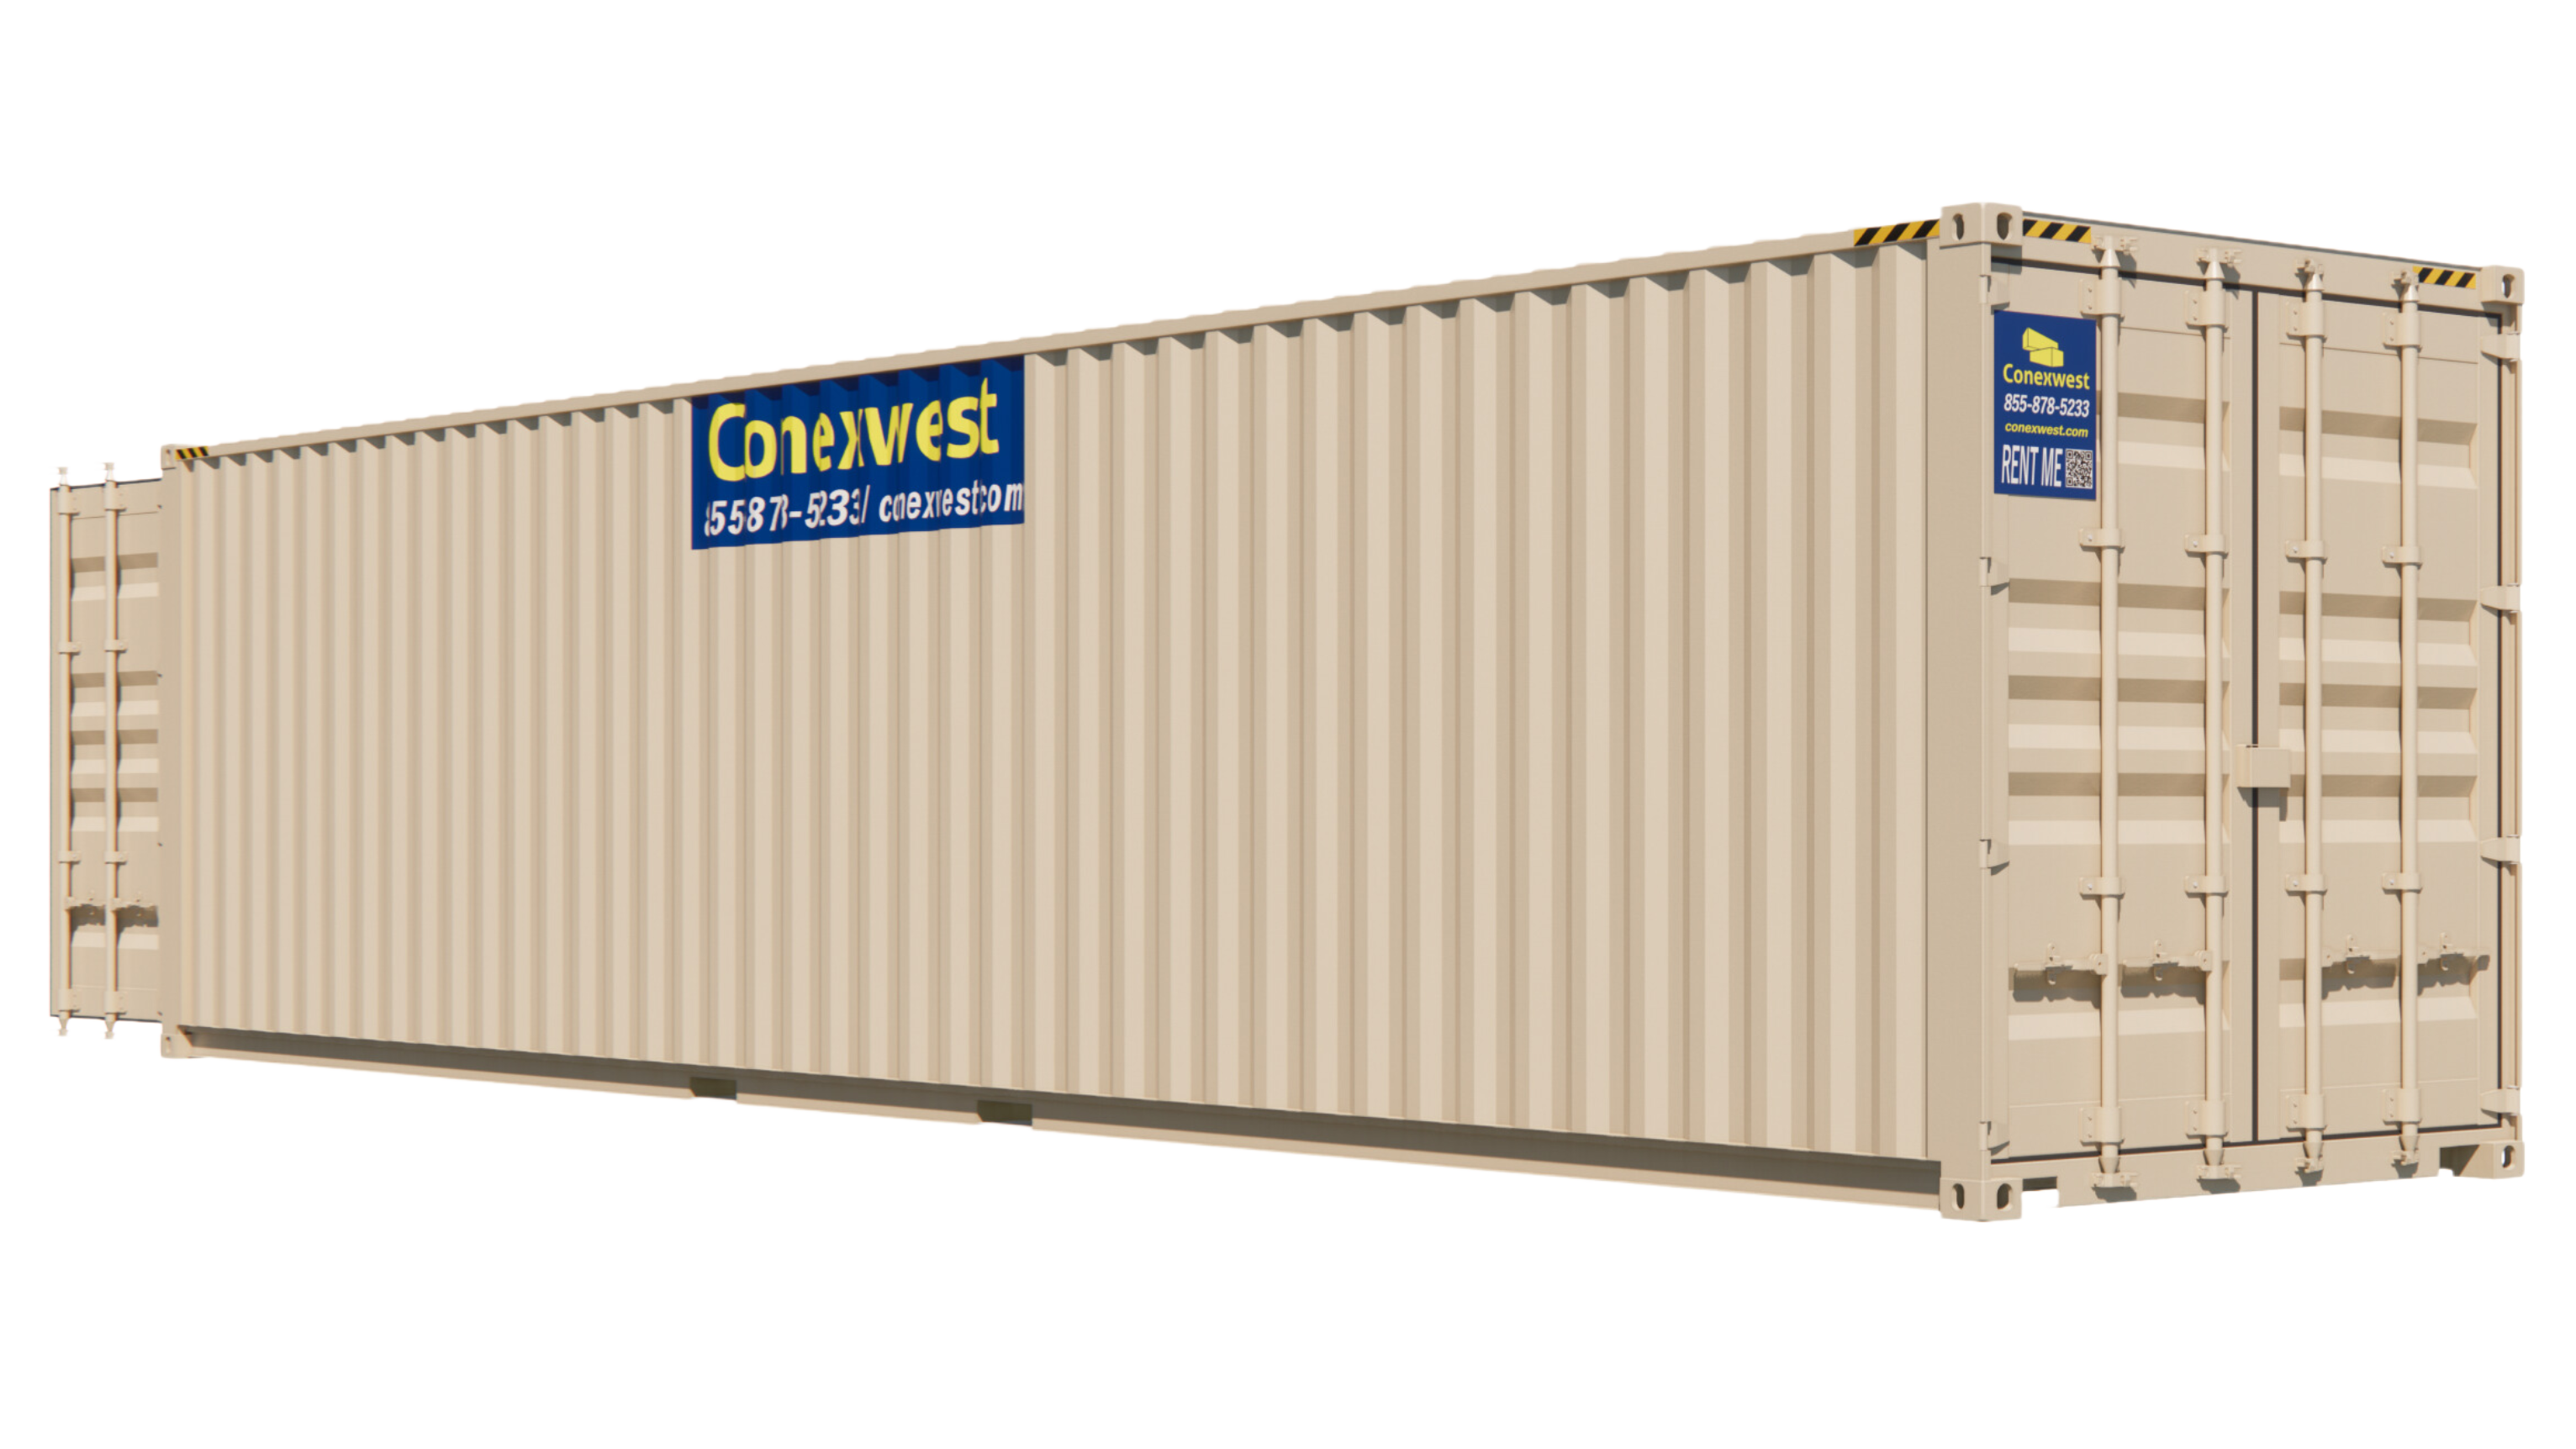 Rent 40ft High Cube (9.5ft) Storage Container w/ Doors on Both Ends